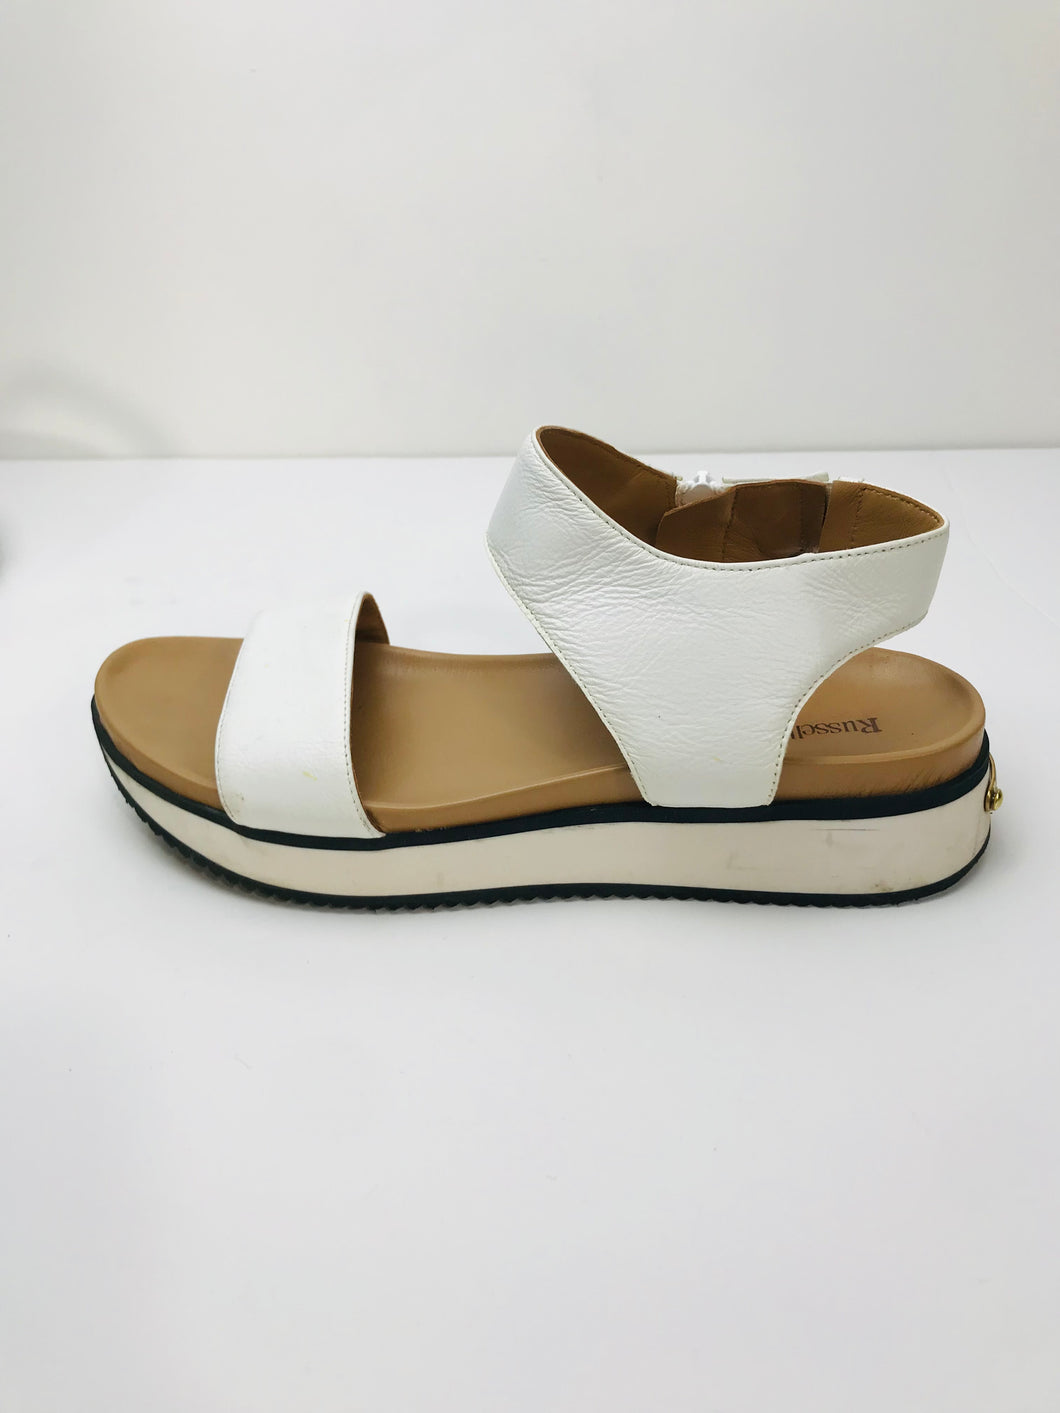 Russell & Bromley Women's Leather Sandals | EU40 UK7 | White